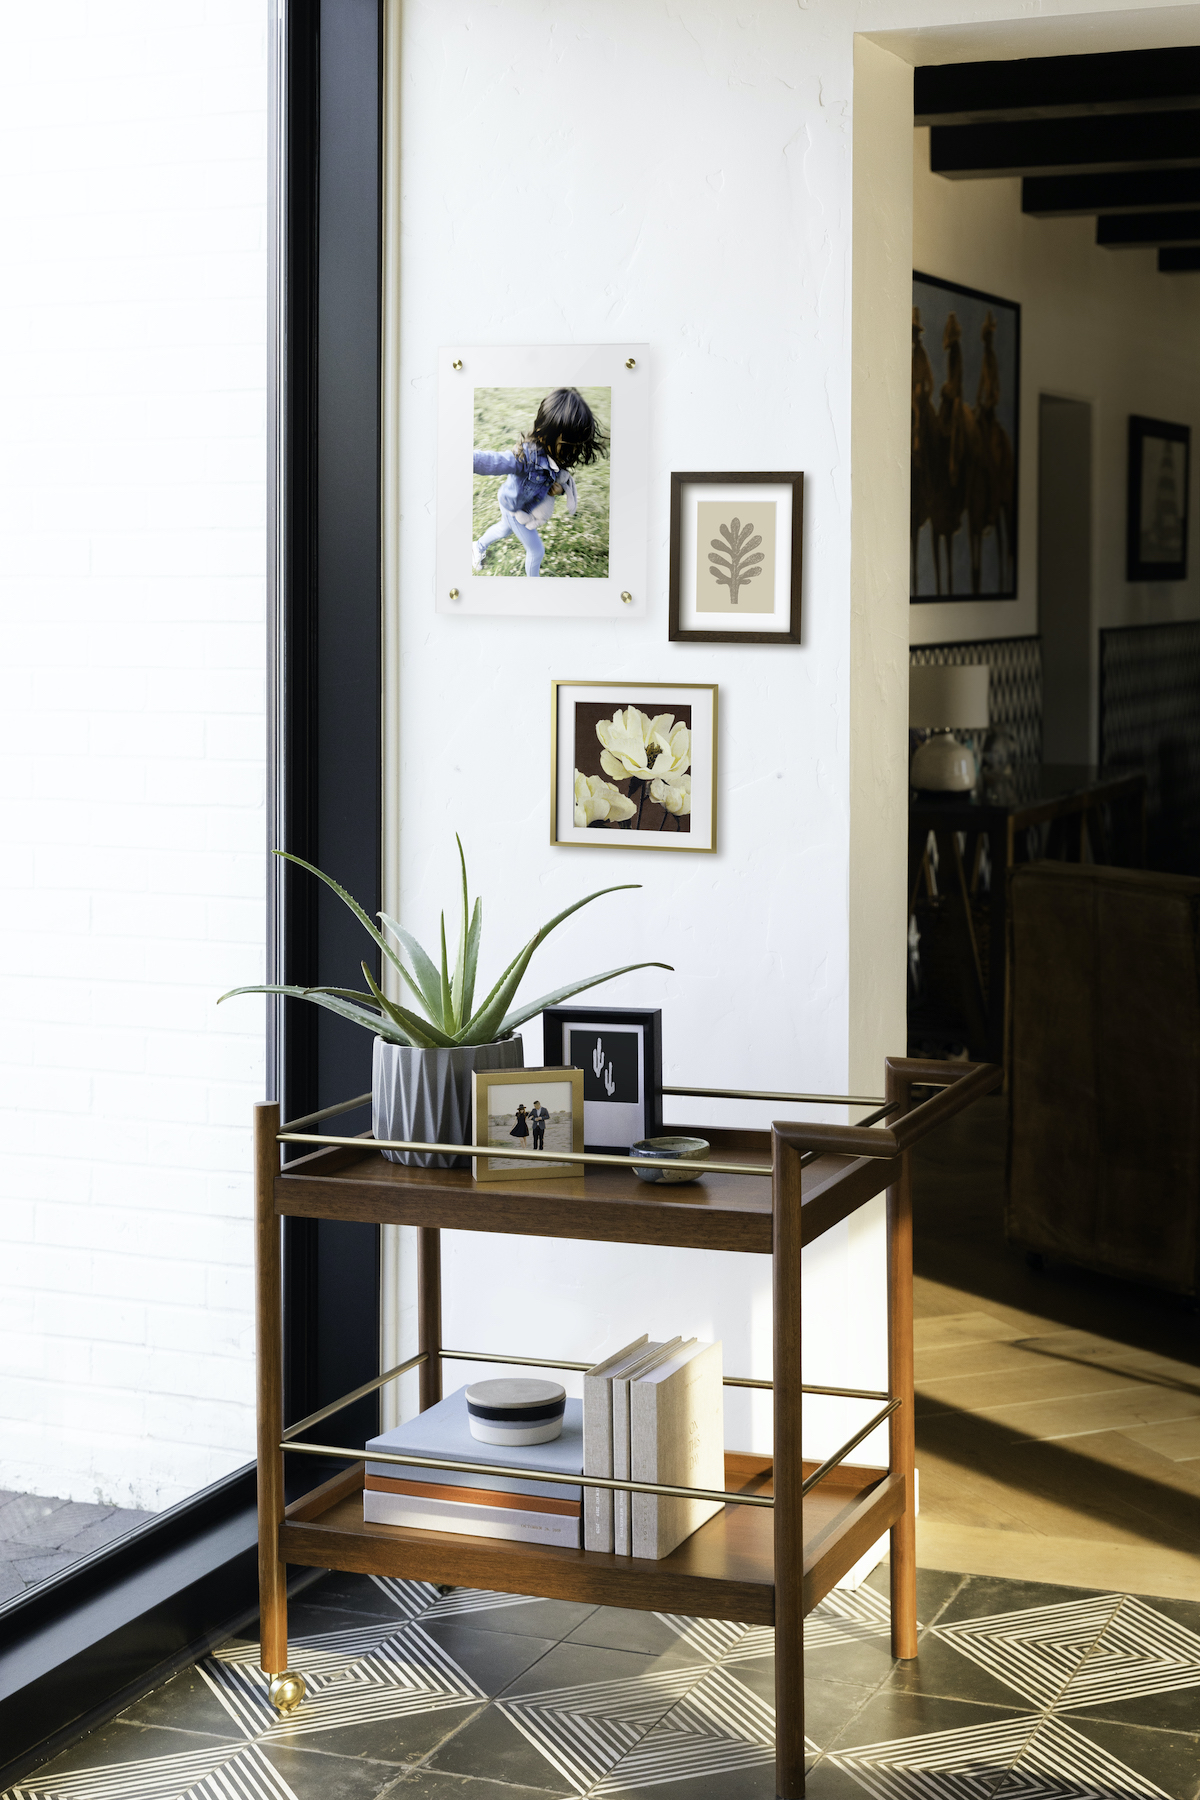 A corner filled with frames, a side table, photo books, and greenery.